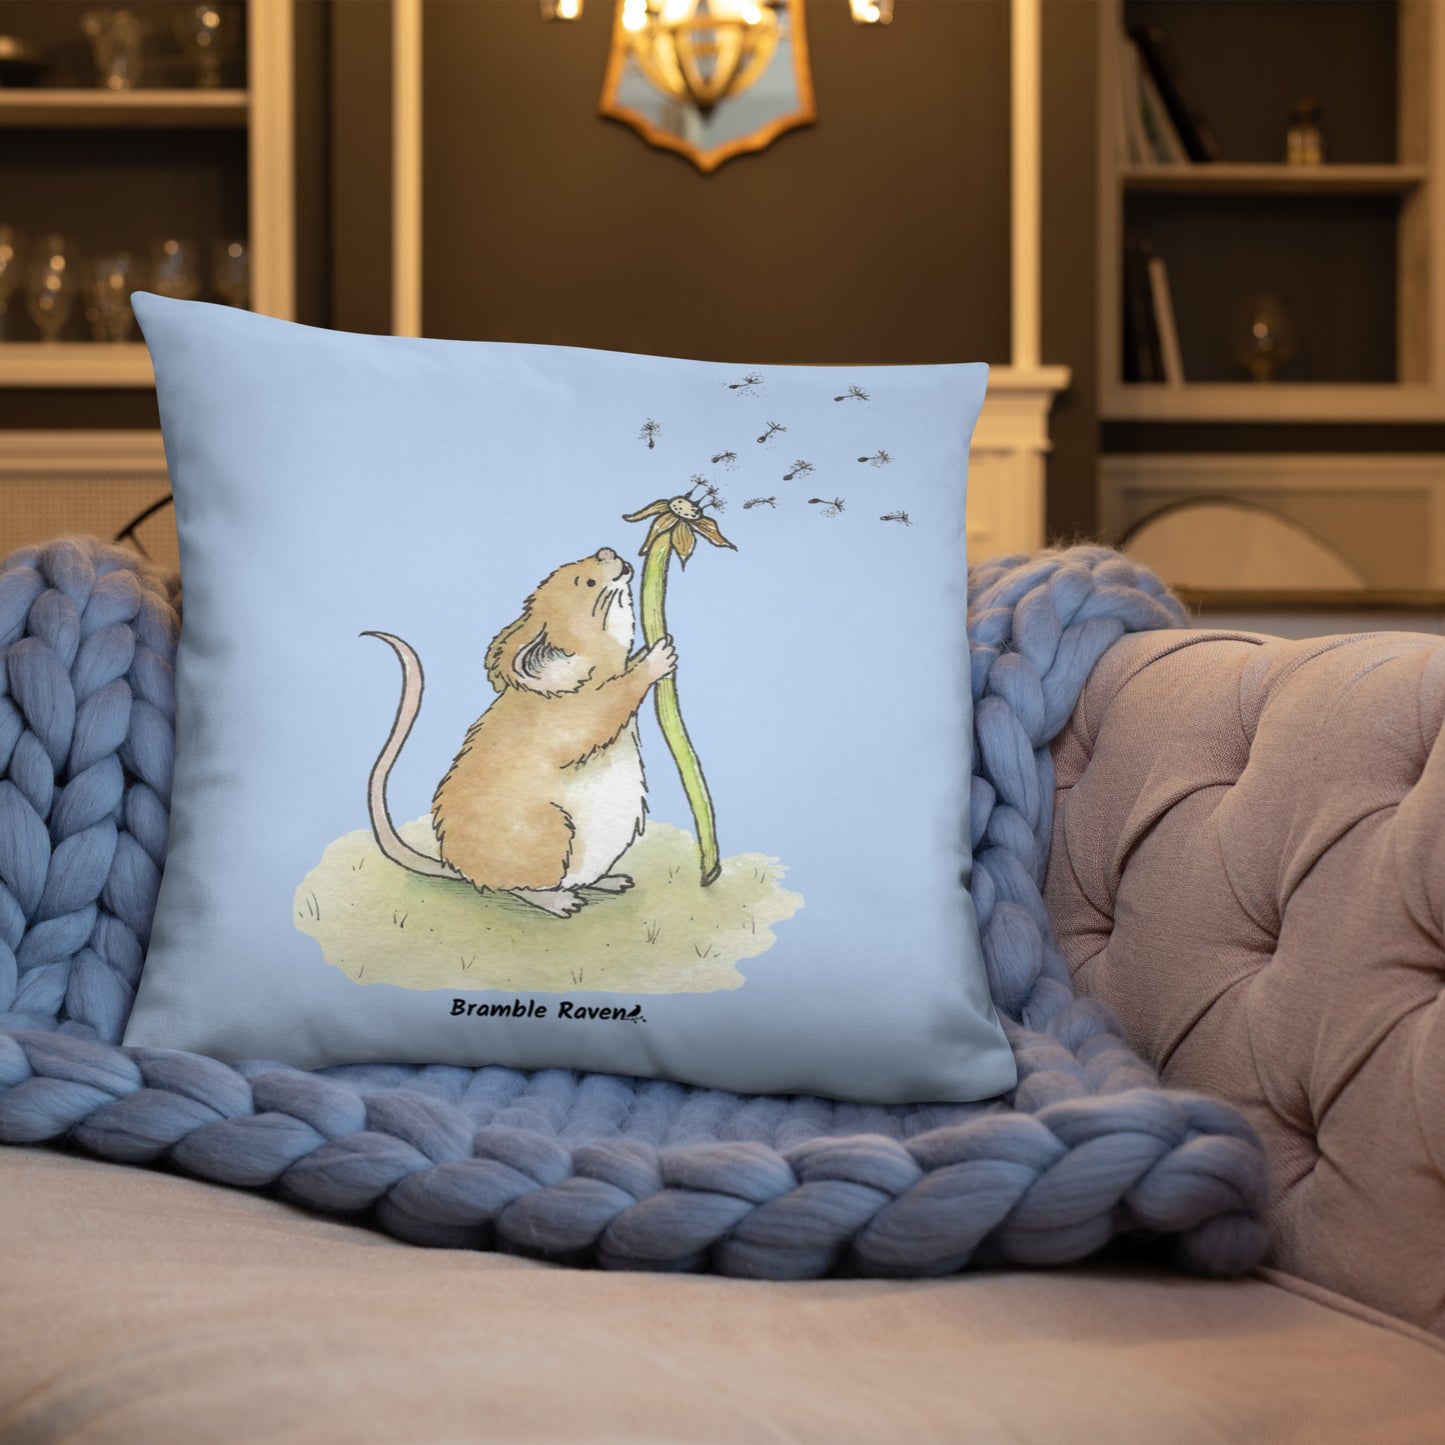 Original Dandelion Wish design of cute watercolor mouse blowing dandelion seeds on a light blue background. Double-sided image on 22 by 22 inch pillow. Shown on blue knitted blanket on couch.